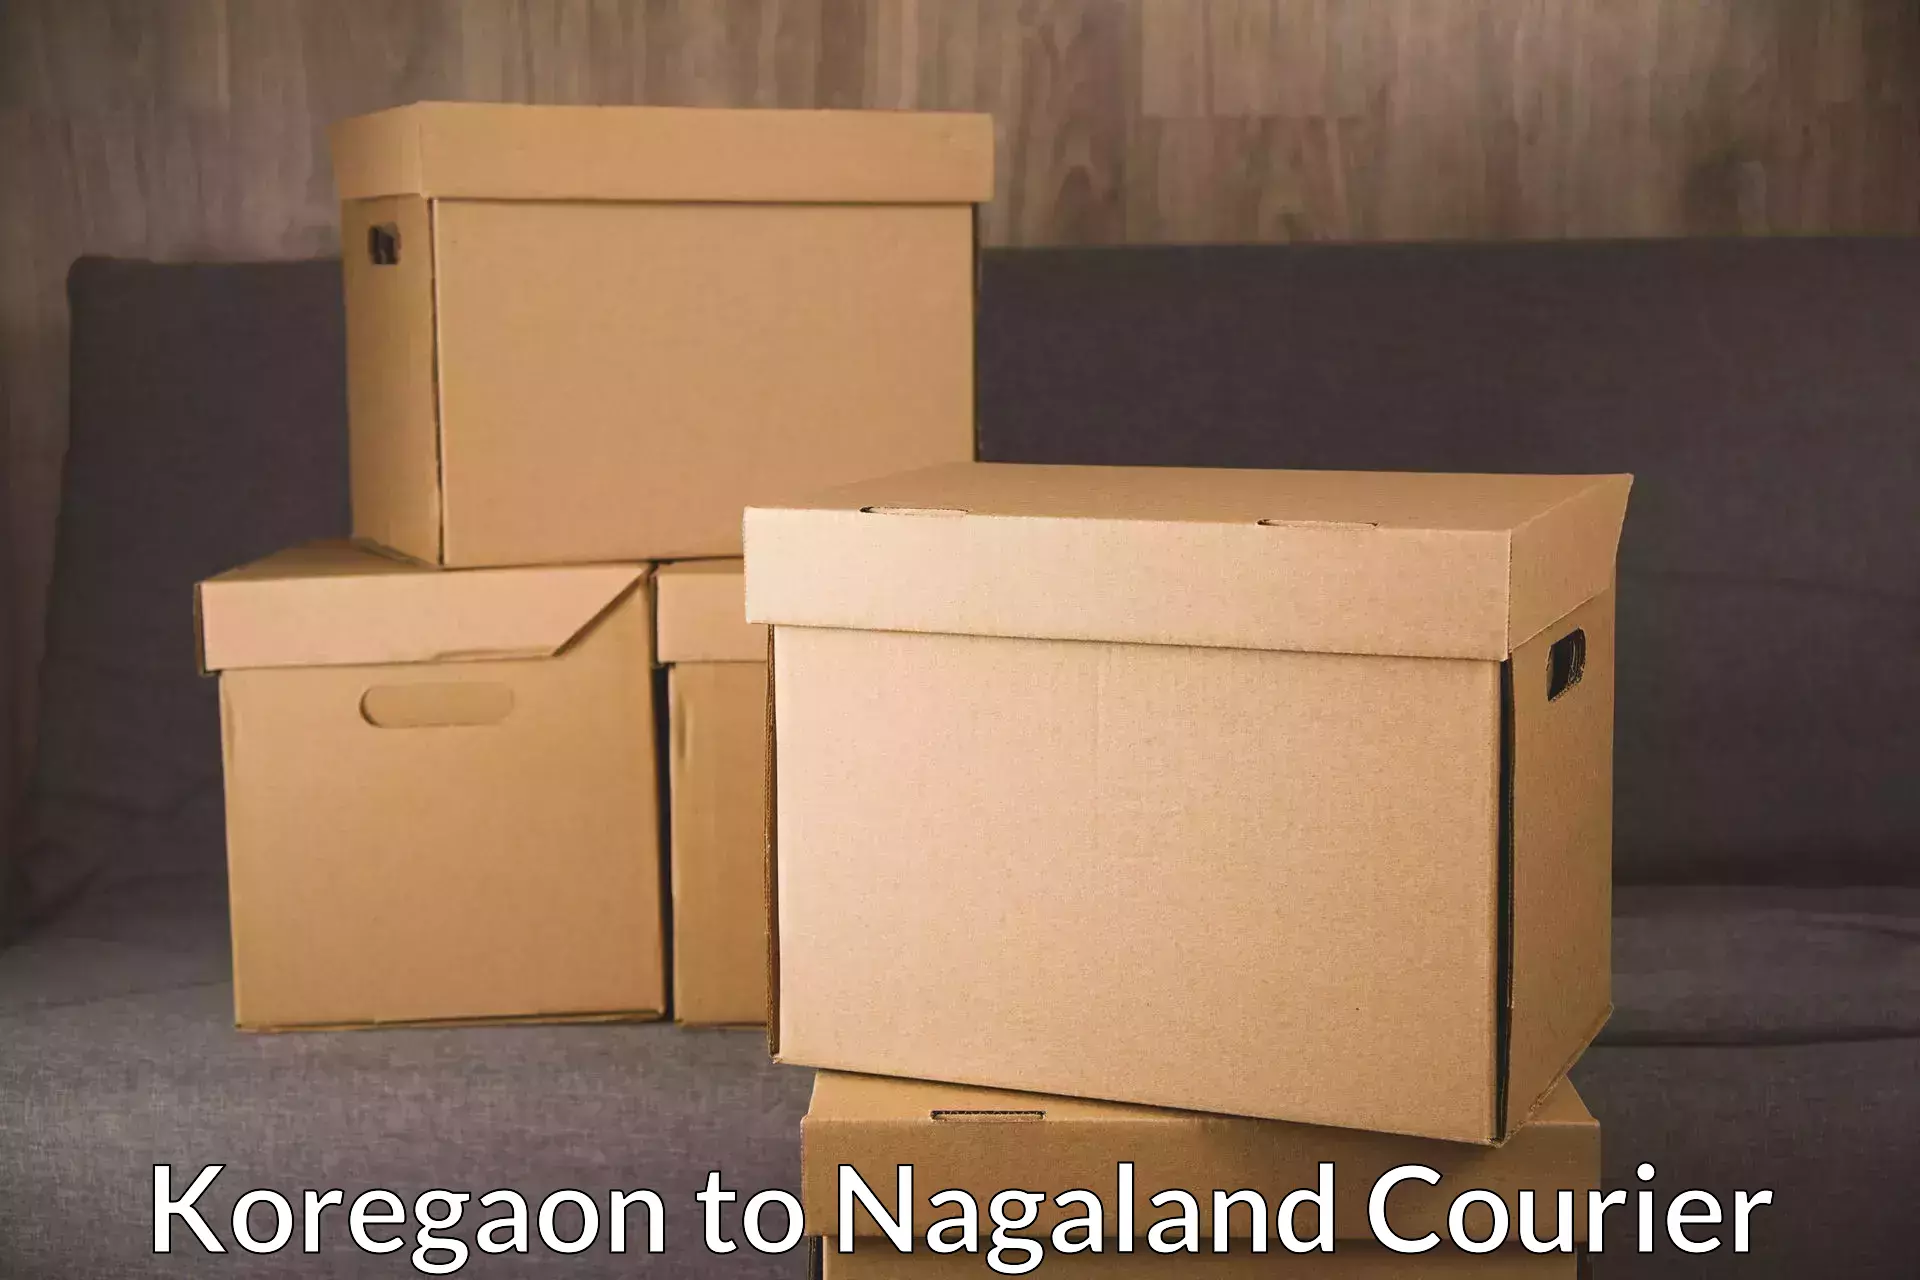 Package delivery network Koregaon to Nagaland